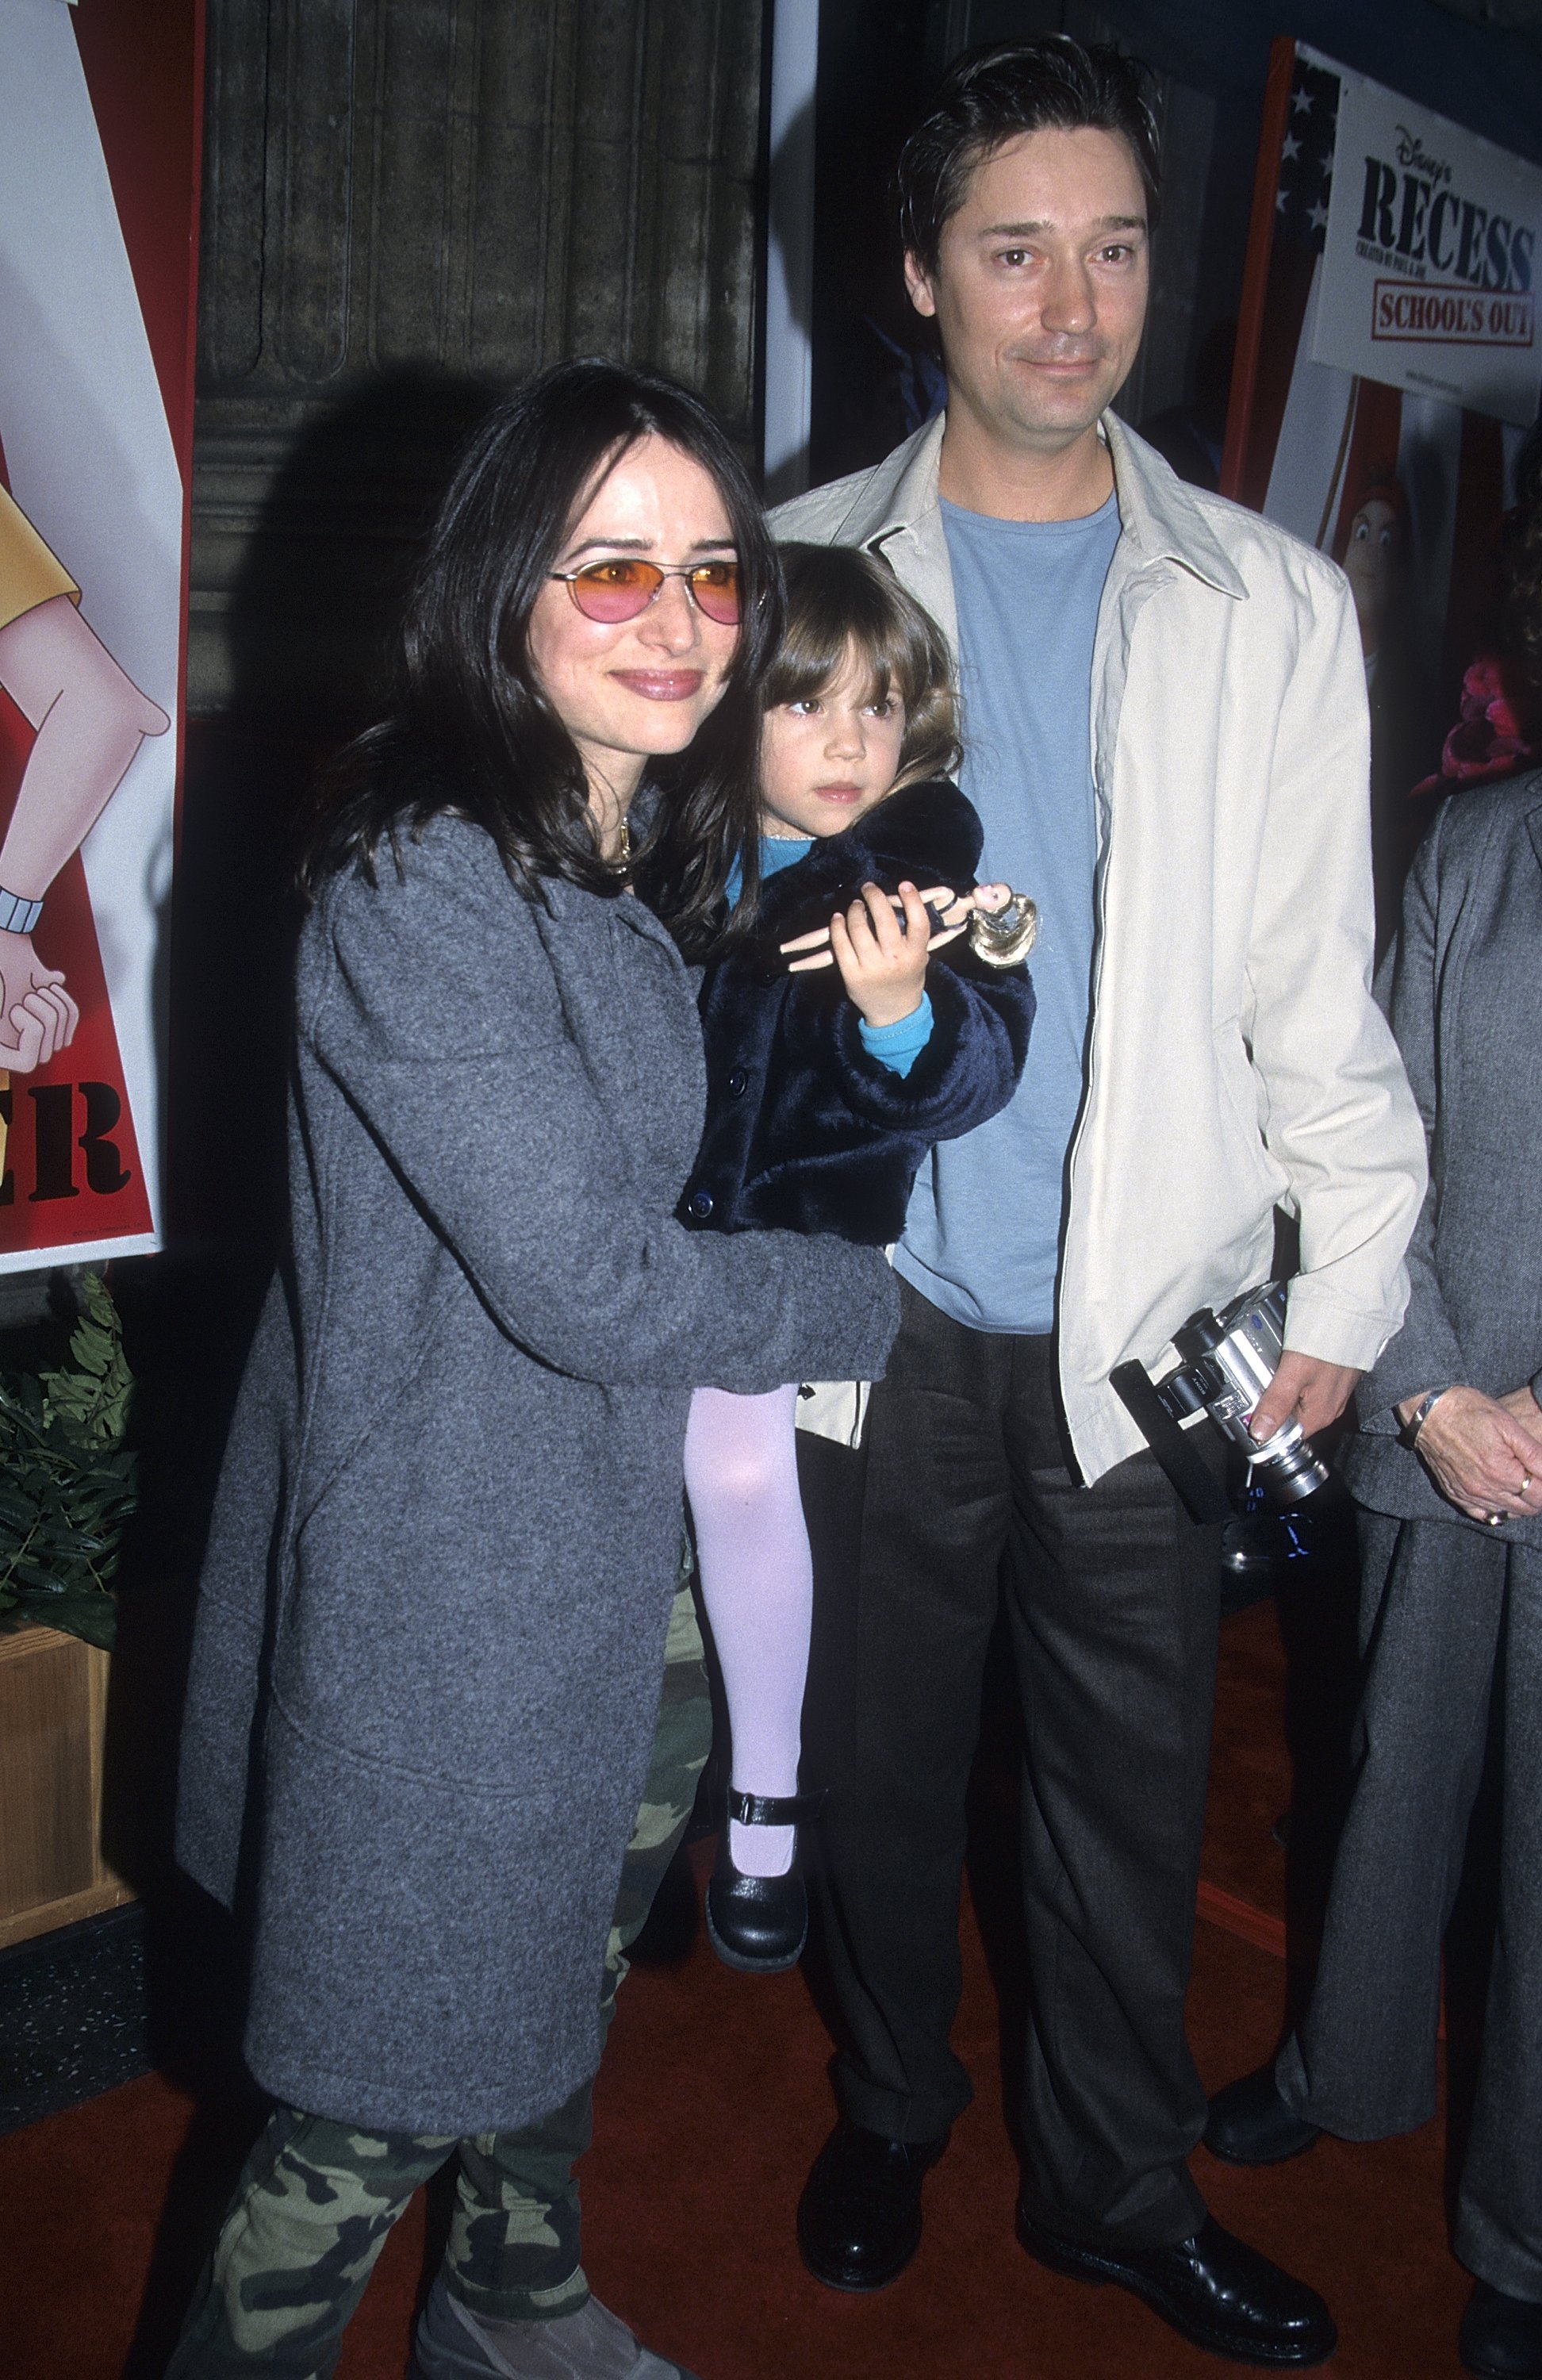  Actress Pamela Adlon (nee Segall), husband Felix O. Adlon and daughter attend the "Recess: School's Out" Hollywood Premiere on February 10, 2001, at the El Capitan Theatre in Hollywood, California. | Source: Getty Images